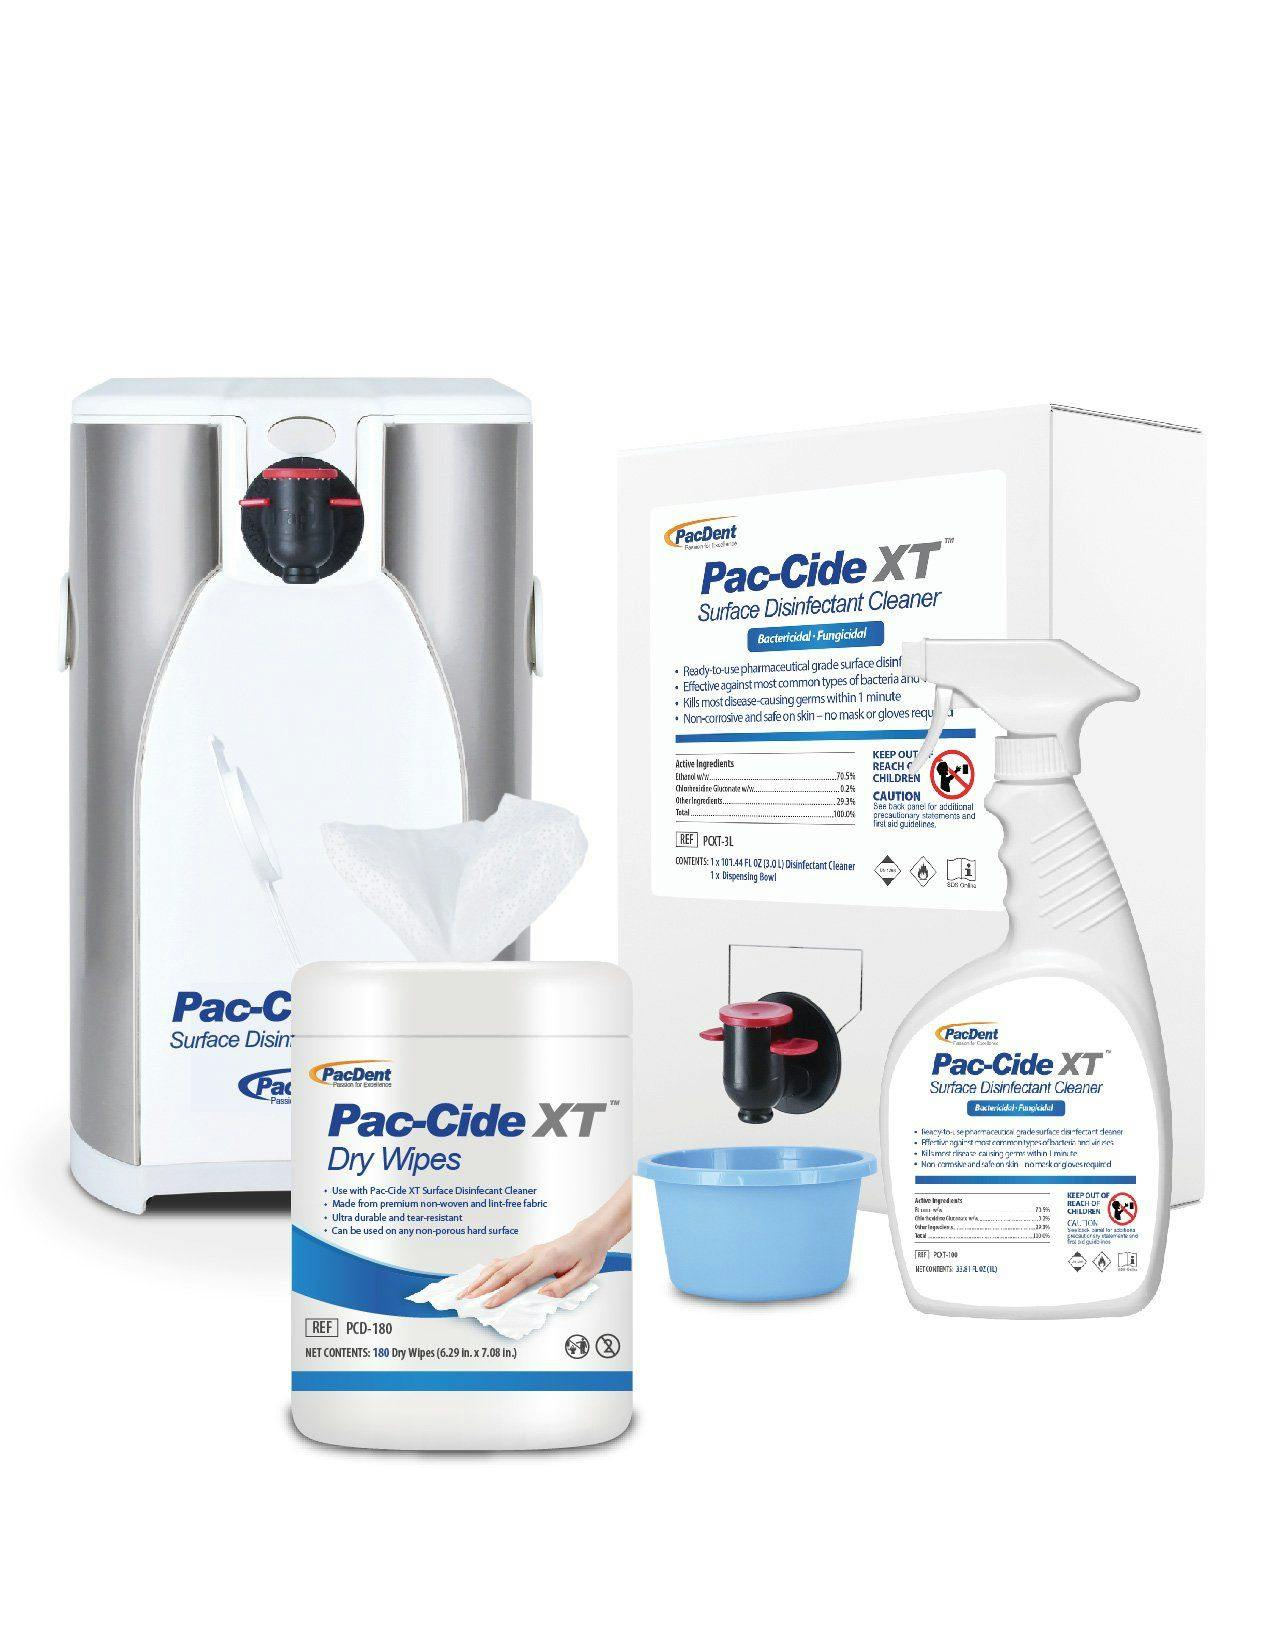 Pac-Cide XT is a pharmaceutical-grade, intermediate surface disinfectant 